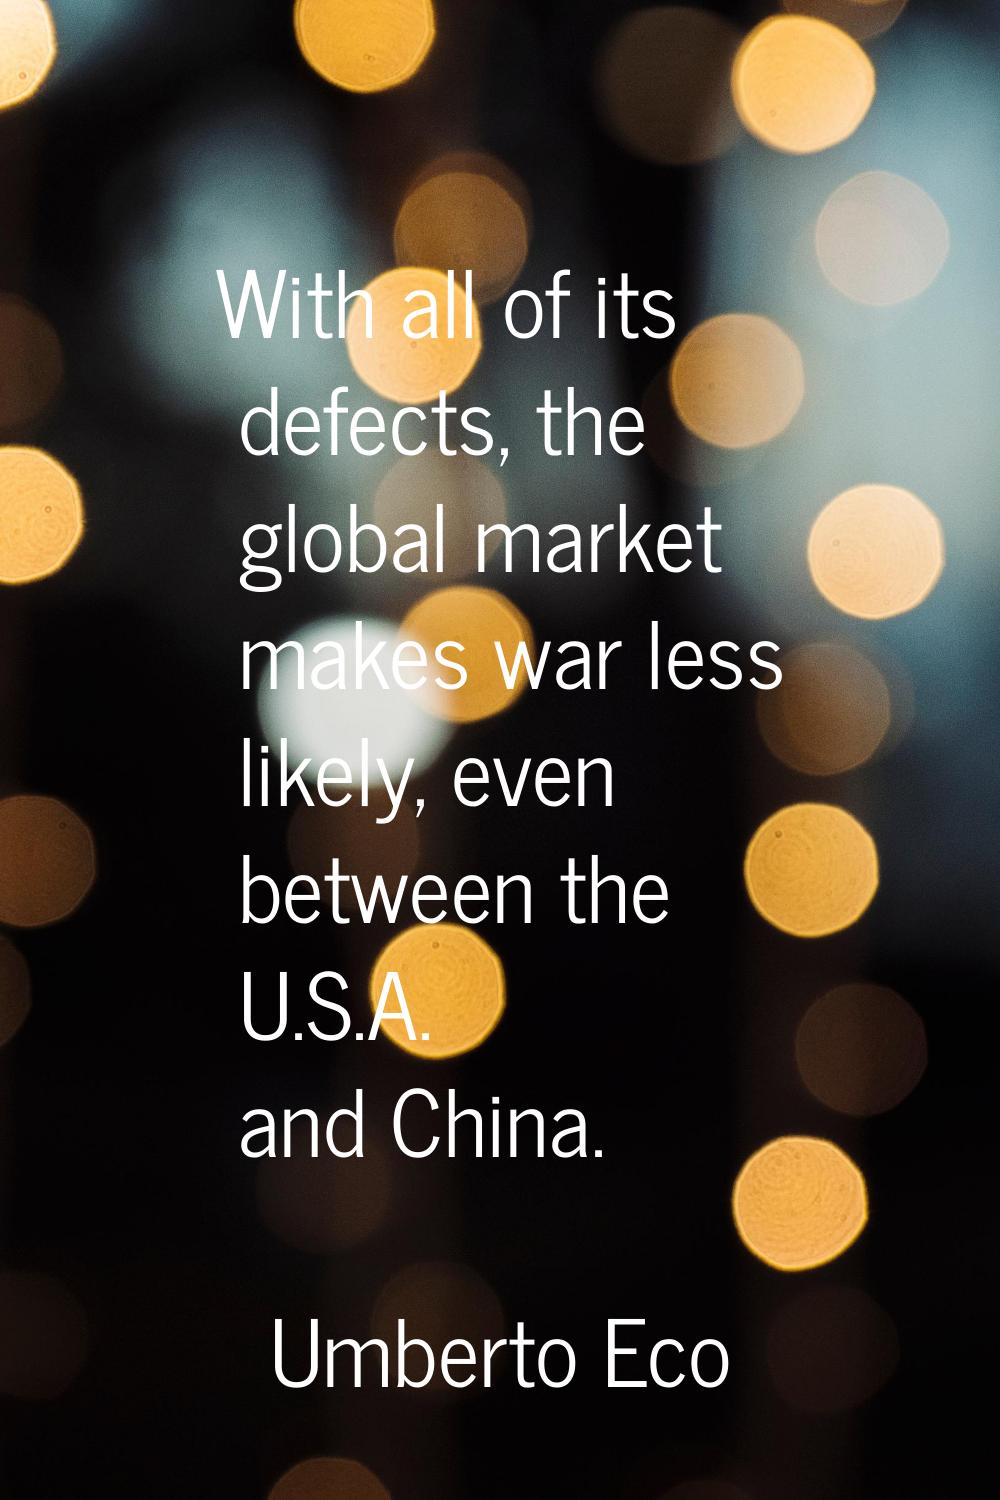 With all of its defects, the global market makes war less likely, even between the U.S.A. and China